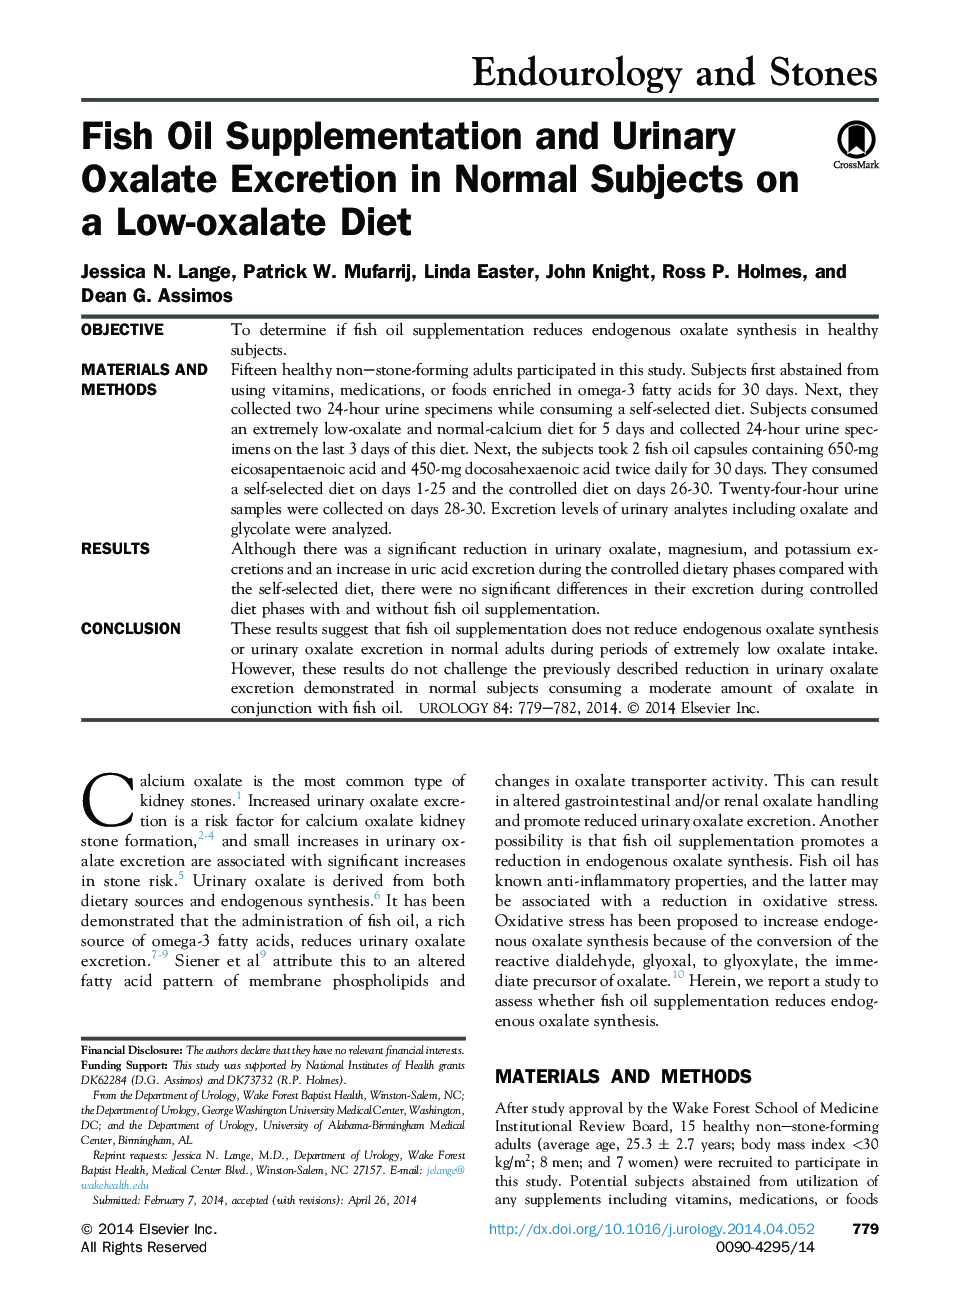 Fish Oil Supplementation and Urinary Oxalate Excretion in Normal Subjects on a Low-oxalate Diet 